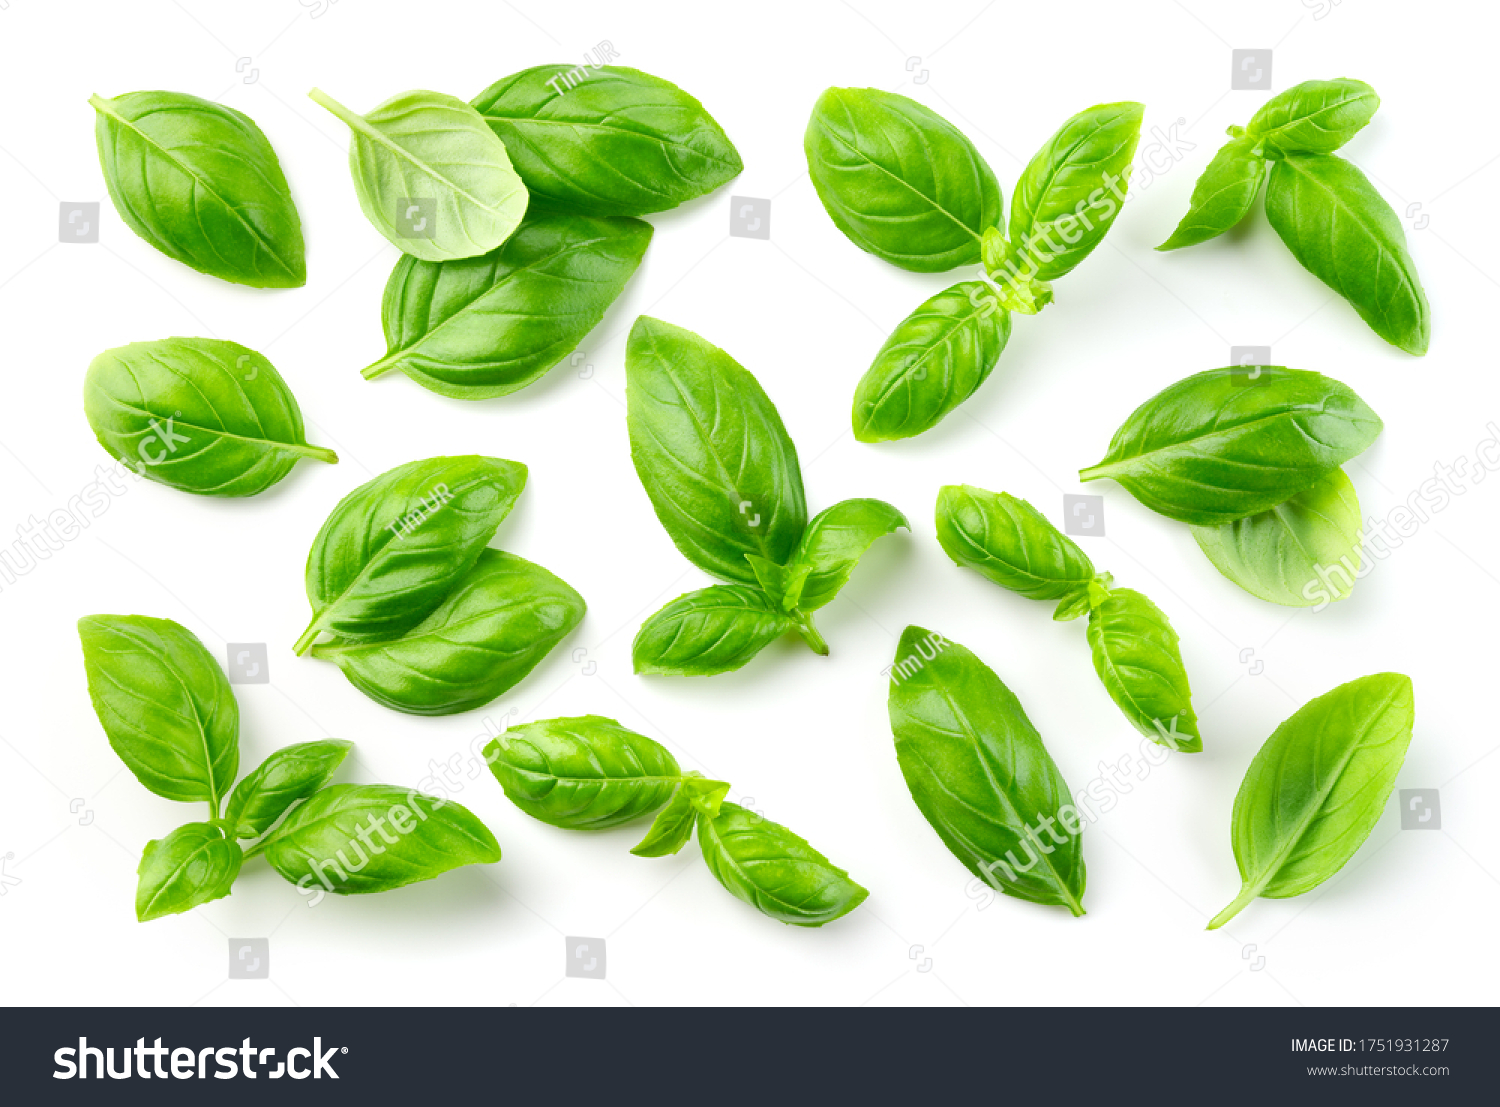 Basil isolated. Basil leaf on white. Basil leaves top view set. #1751931287